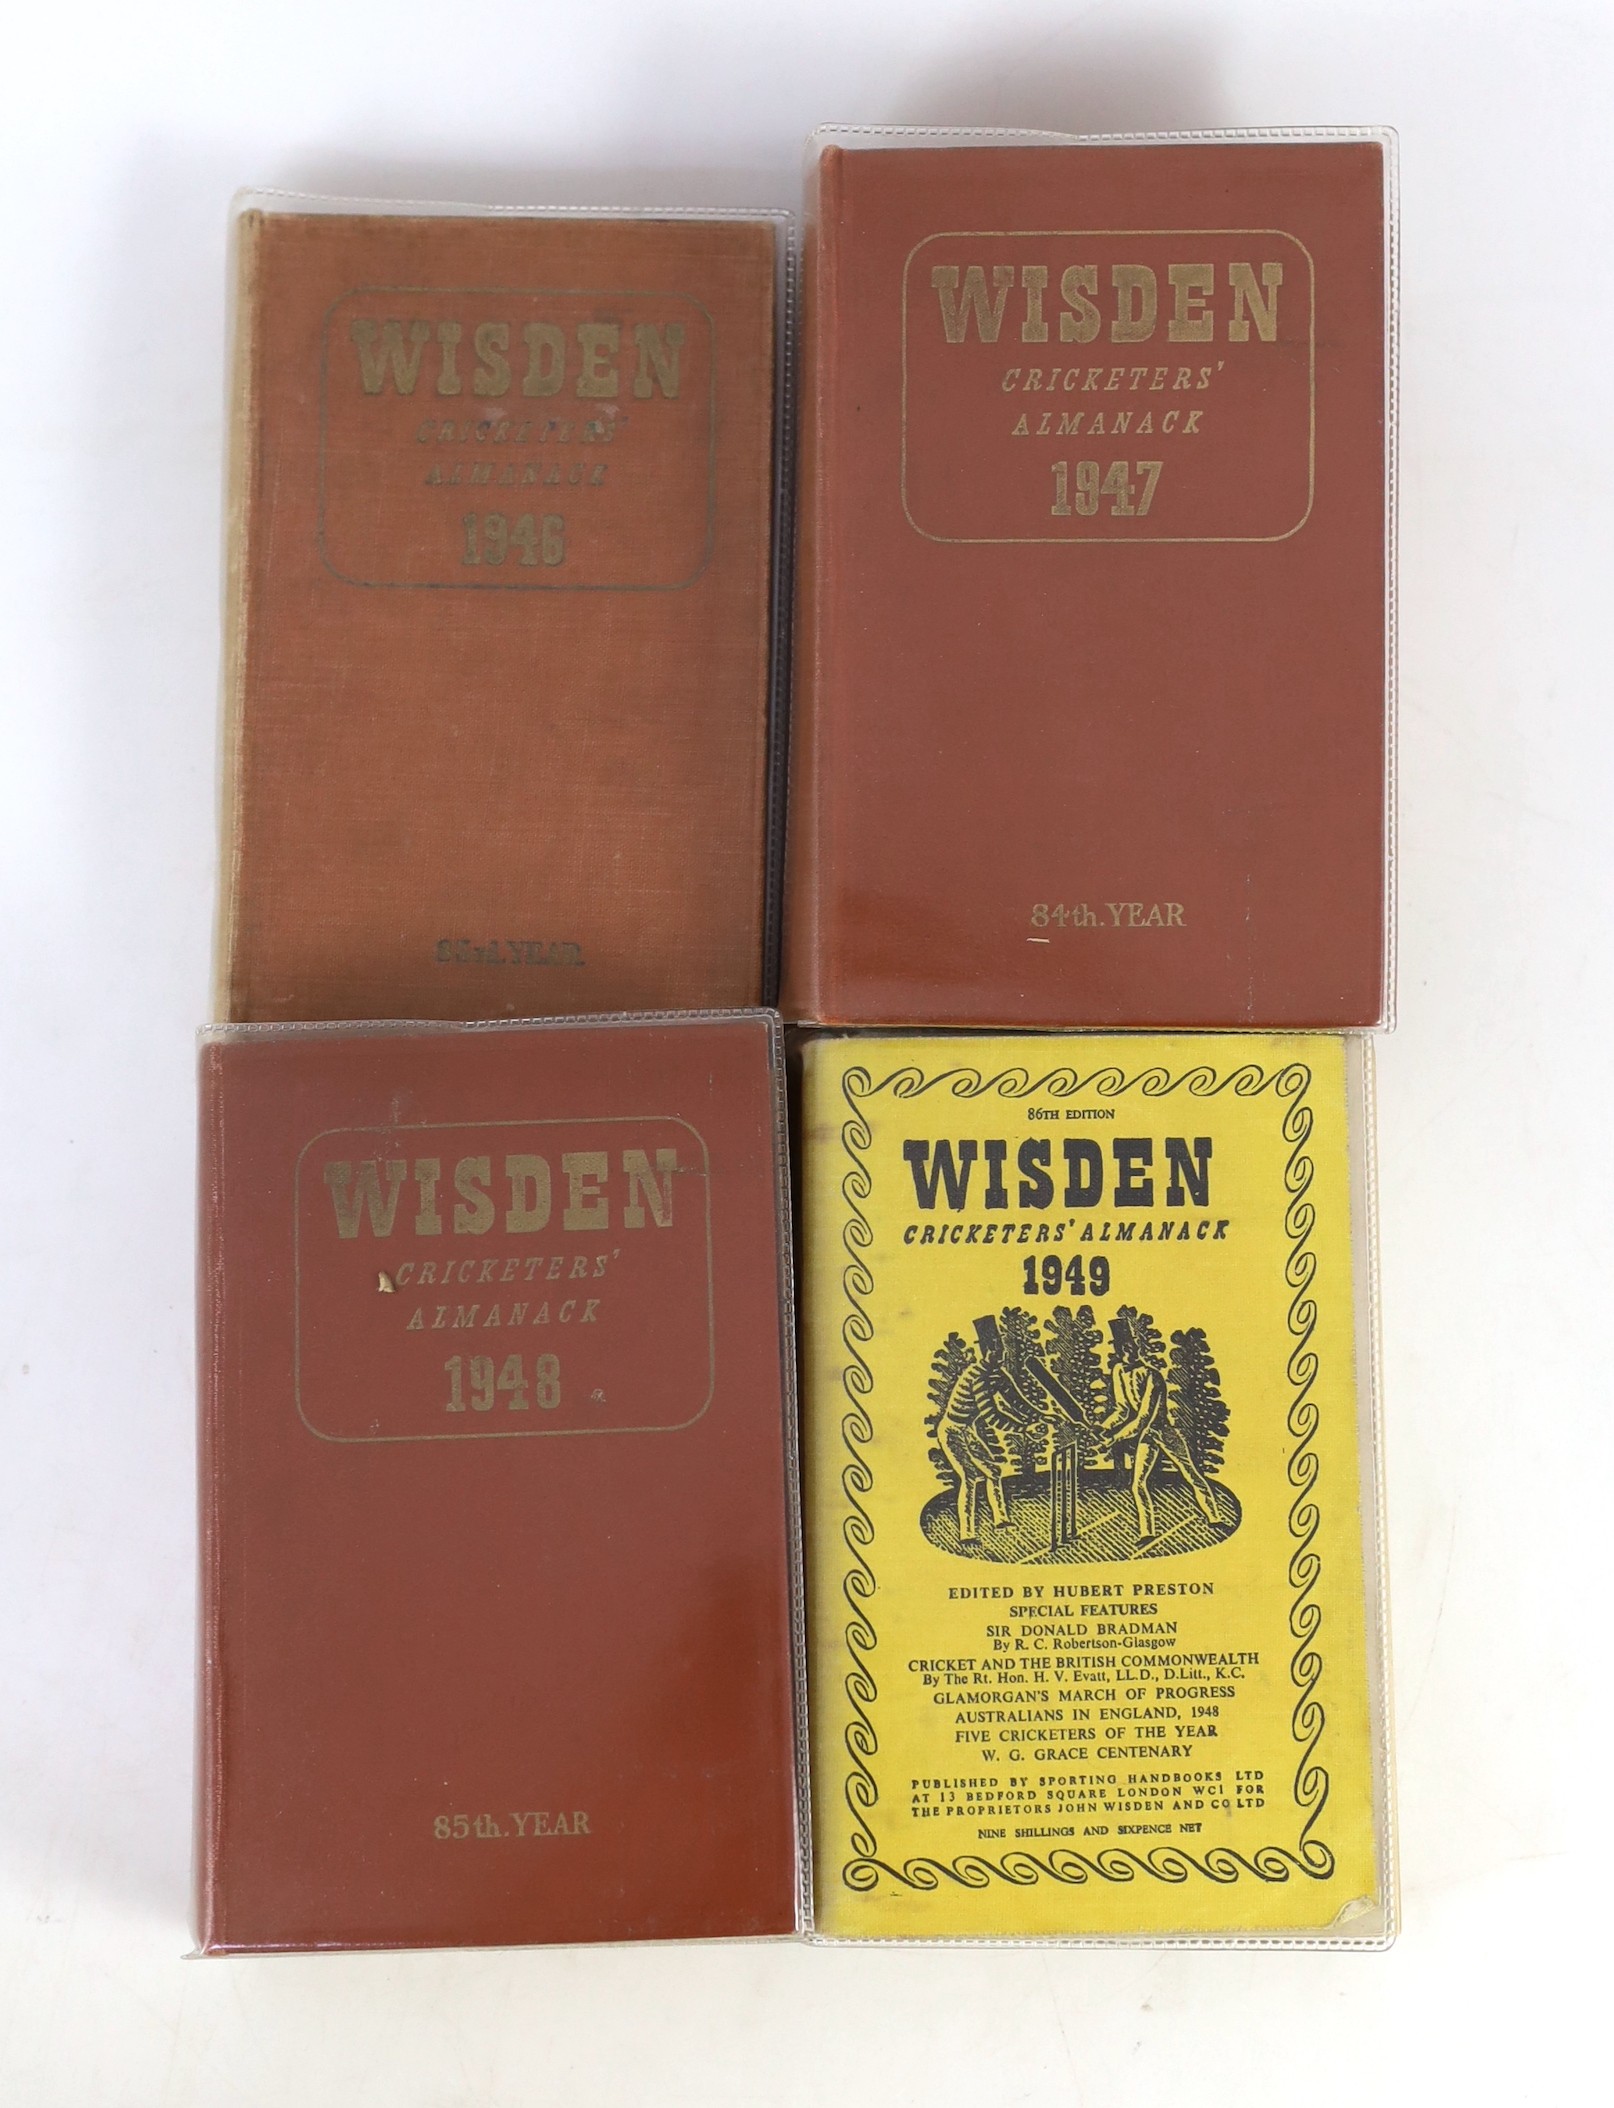 Wisden, John - Cricketers Almanack for the years 1946 (83rd edition) - 1959 (96th edition), original hardbacks for, 1946-49, 1950 and 1952, with original limp cloth wrappers for, 1949, 1953-54, 1956-59, rebound issues fo